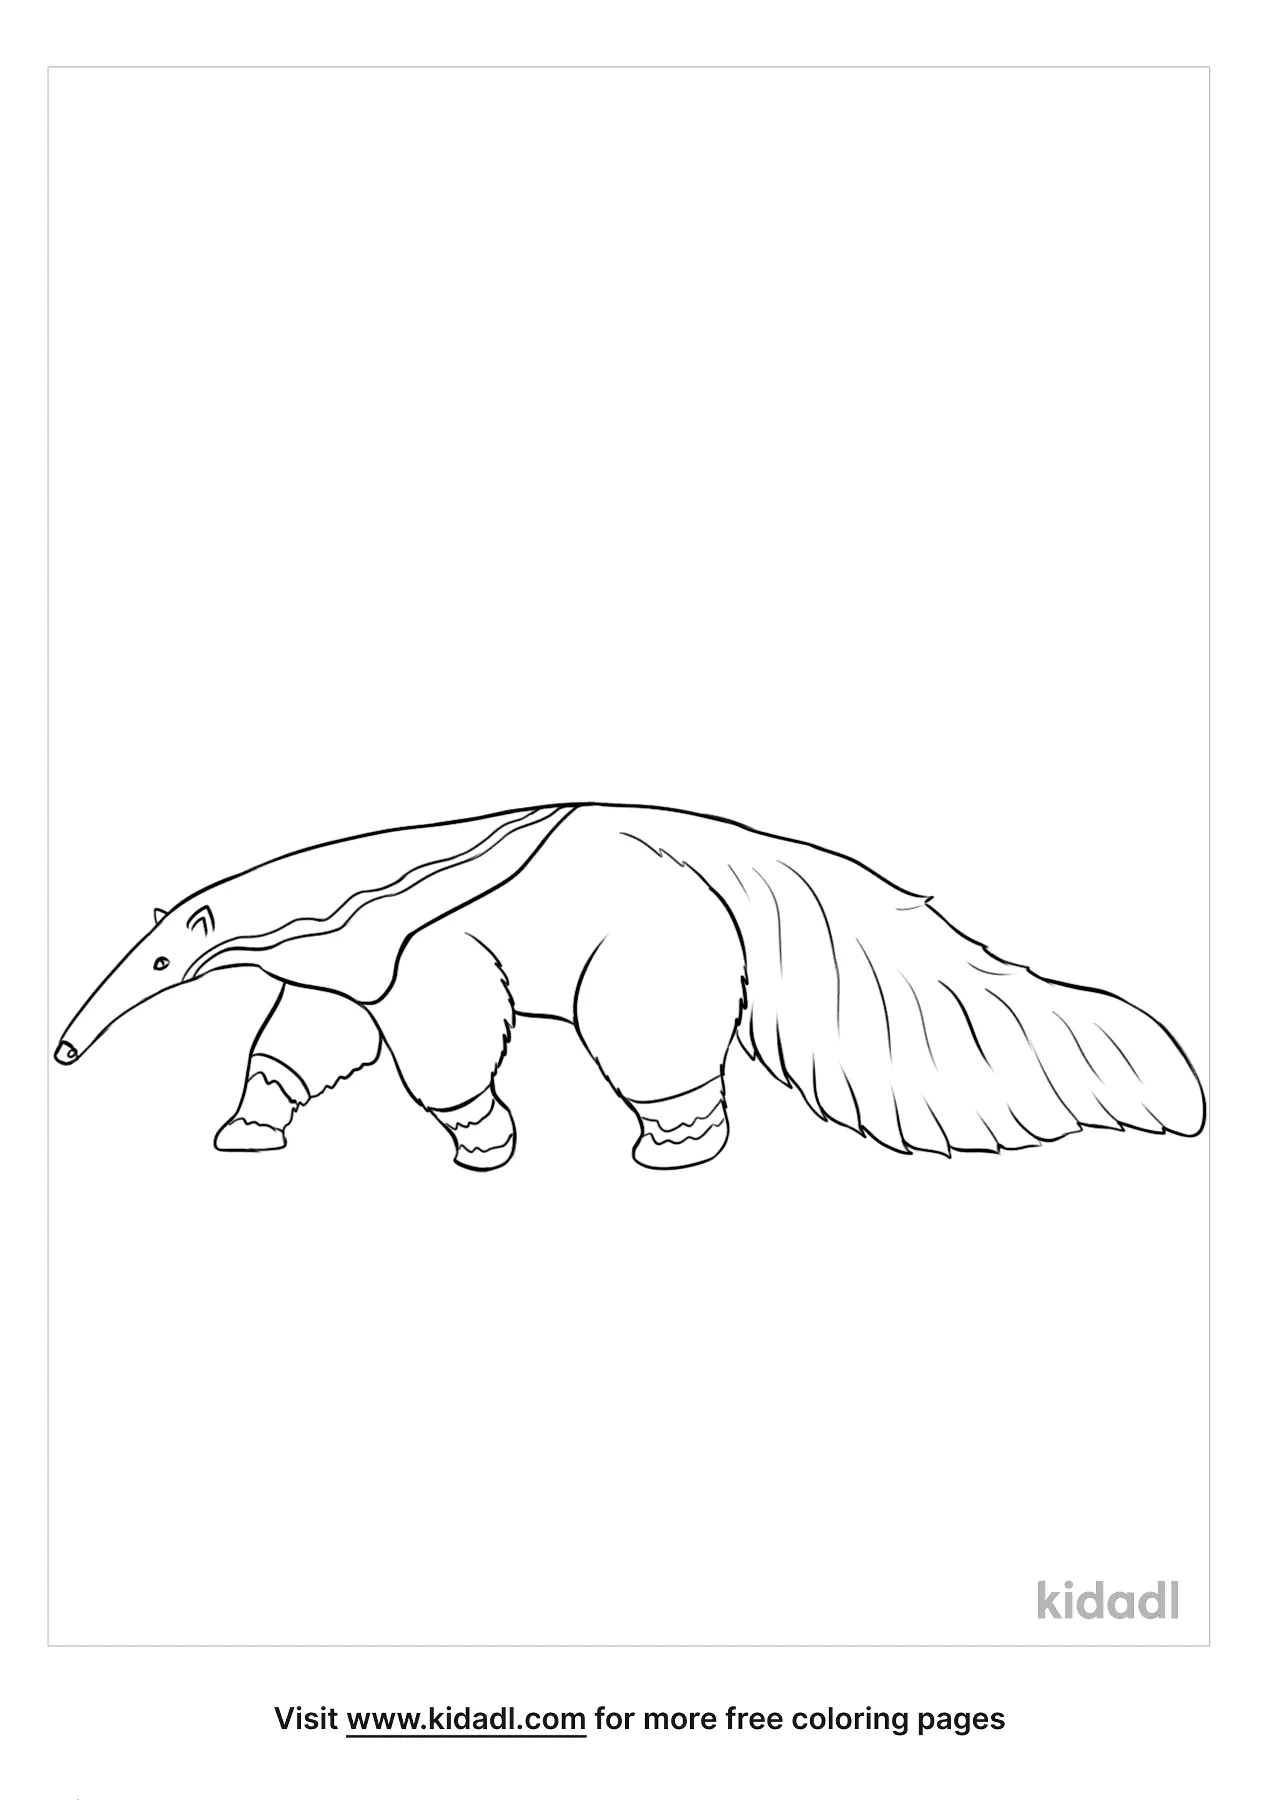 Anteater Coloring Pages   Free Mammals Coloring Pages   Kidadl